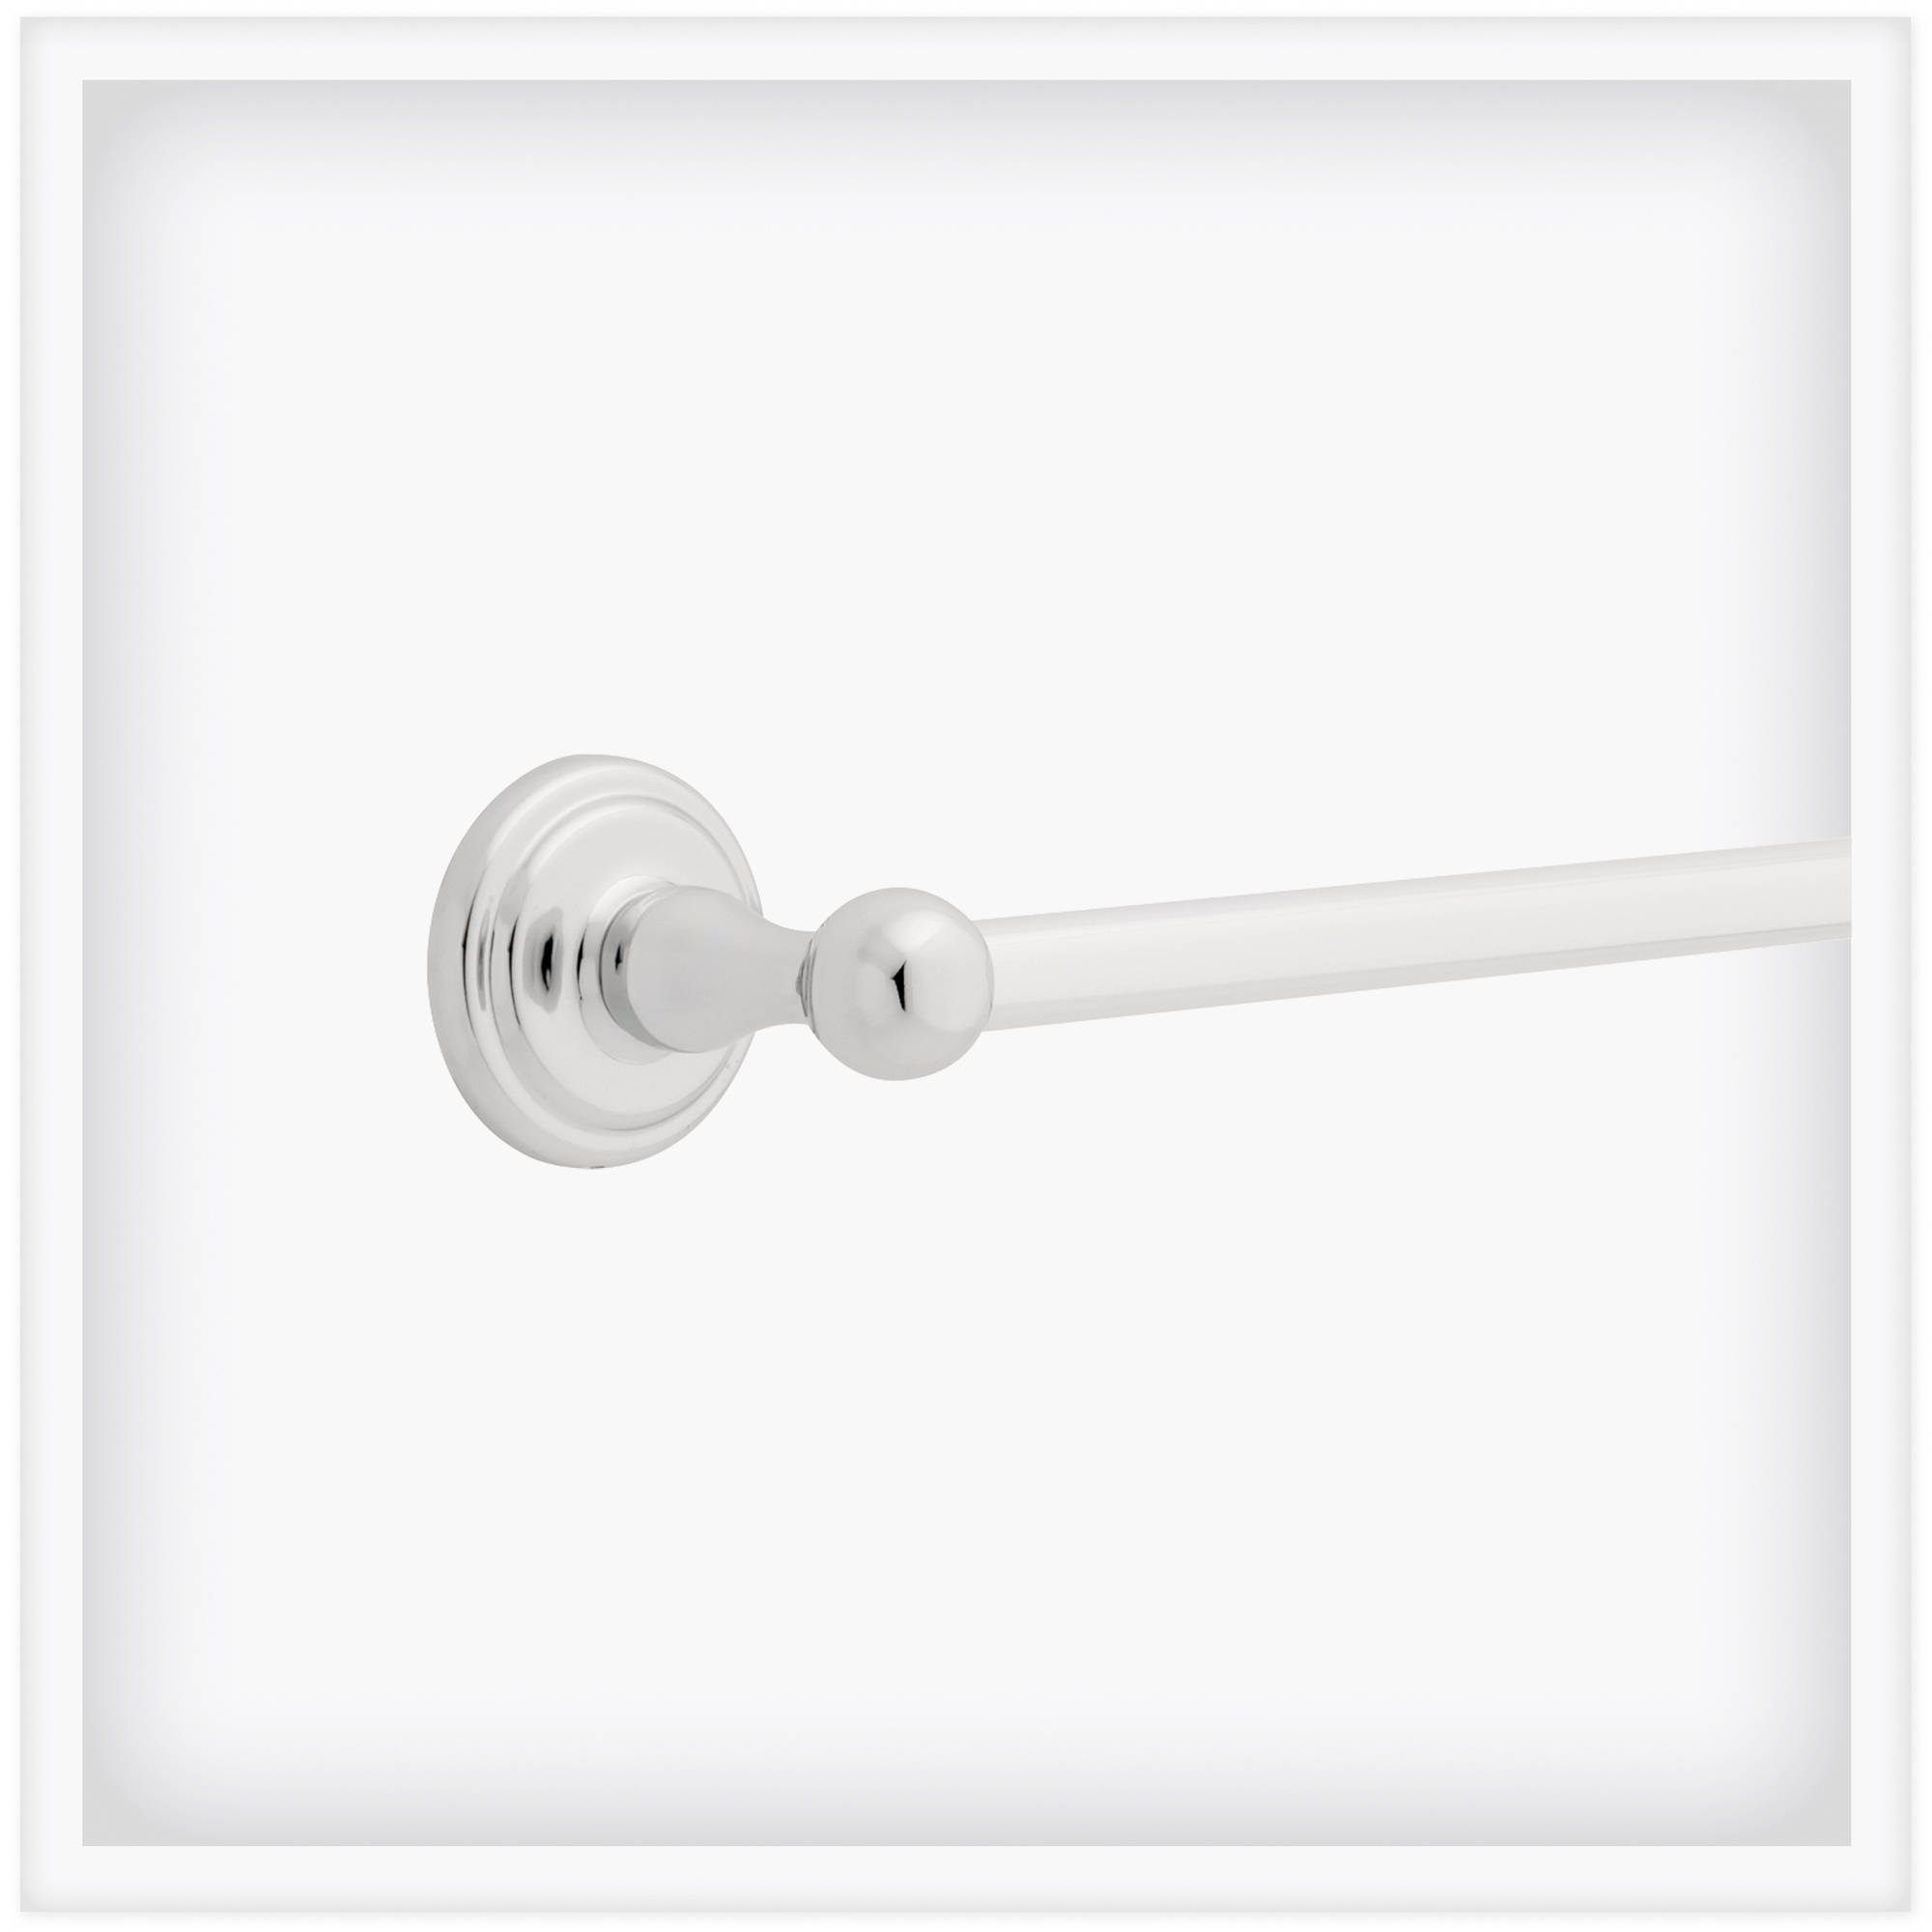 Franklin Brass Jamestown Towel Bar, Available in Multiple Colors and Sizes - image 2 of 3